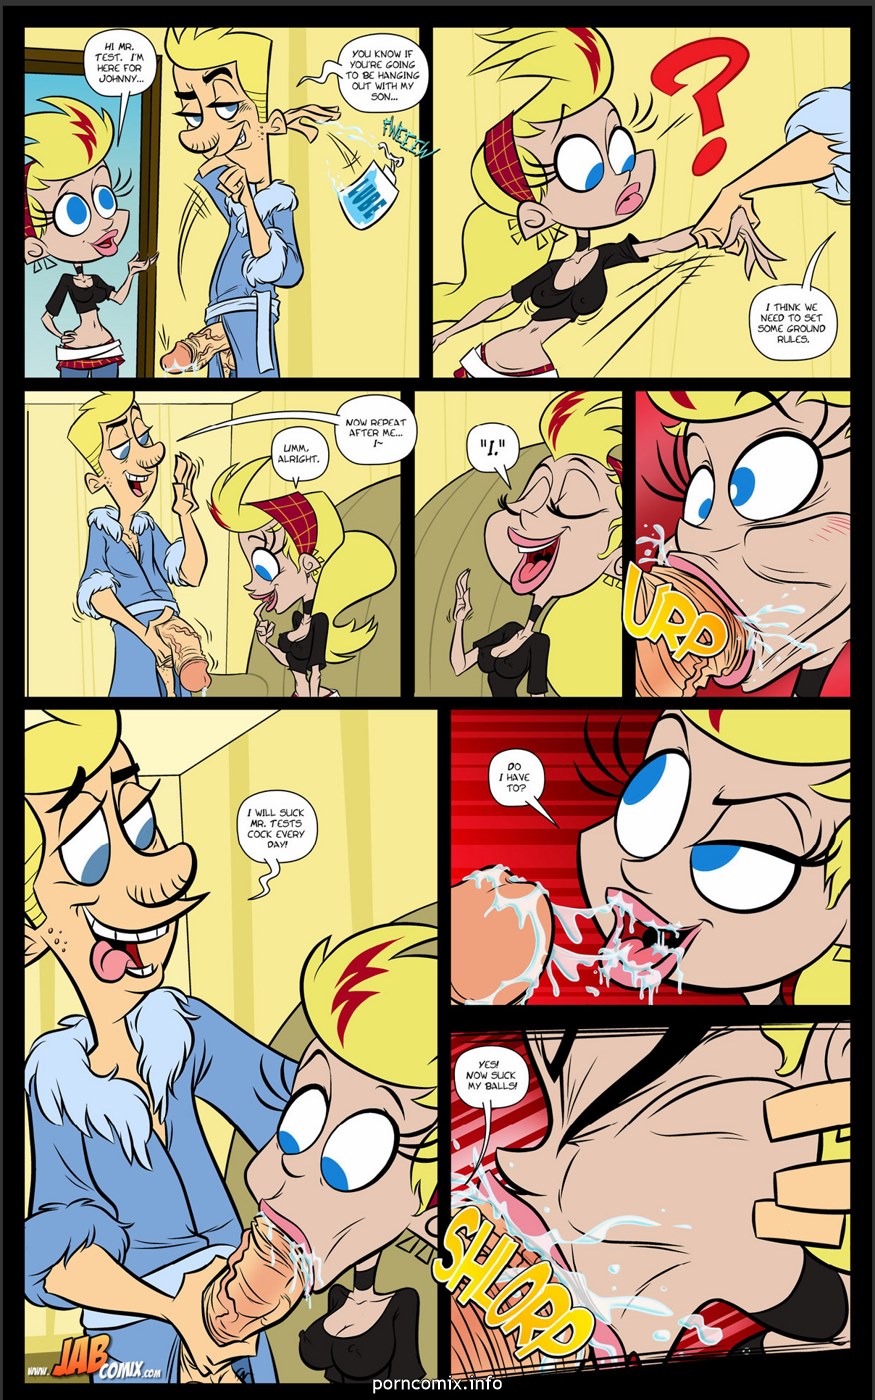 Penetrated Sissy From Johnny Test Porn - Johnny Testicles No.2 - Jab Comix - Porn Comics